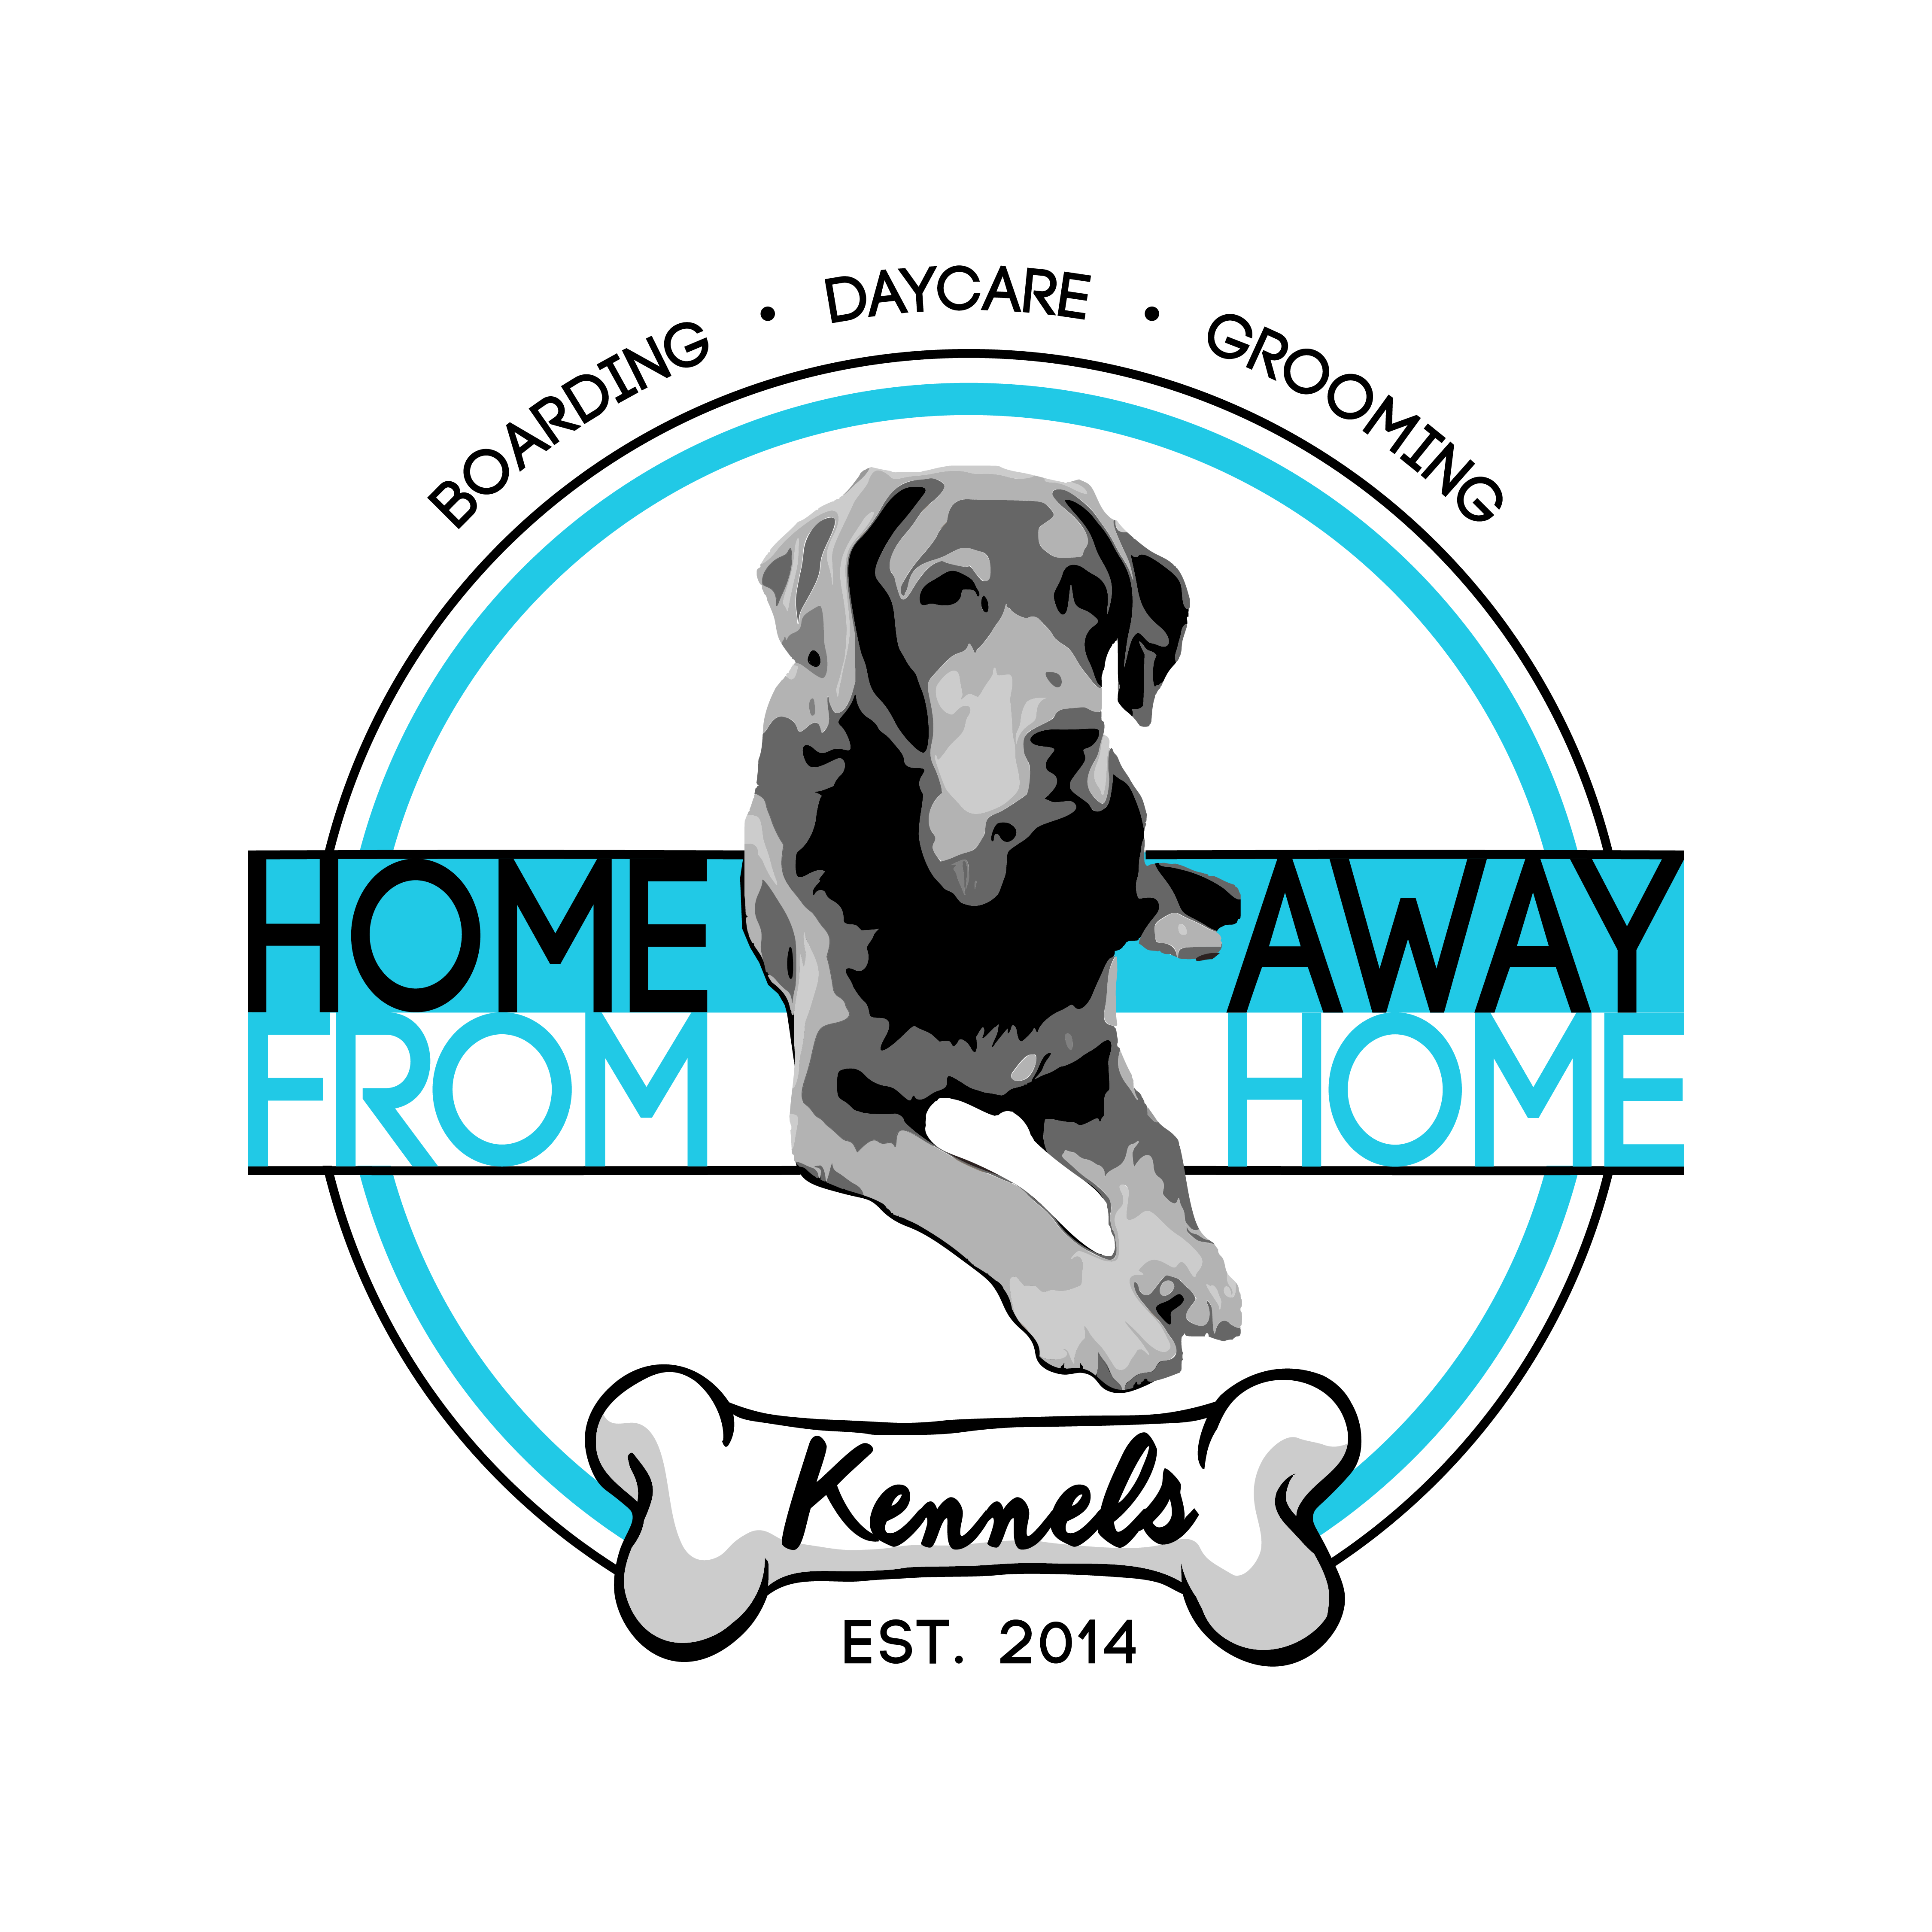 Home Away From Home Kennels